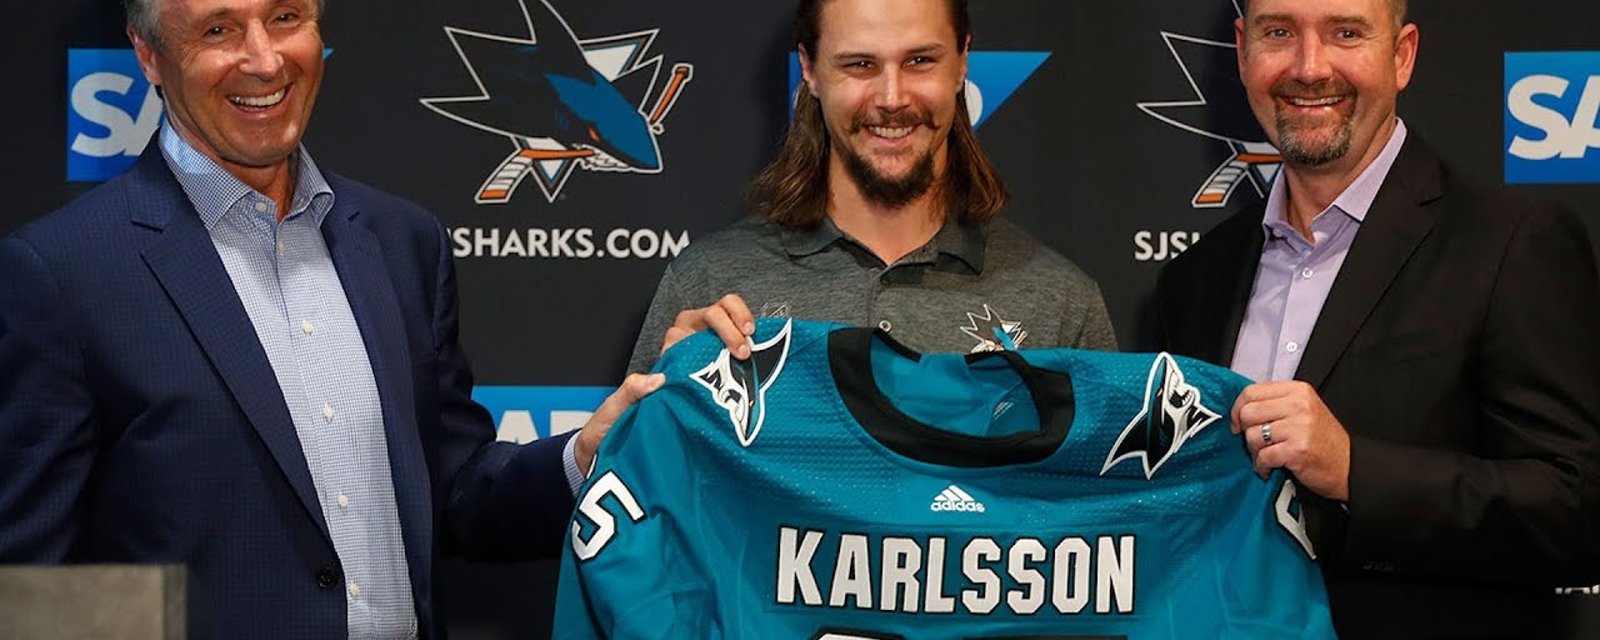 Unexpected factor played a major role in Karlsson trade!